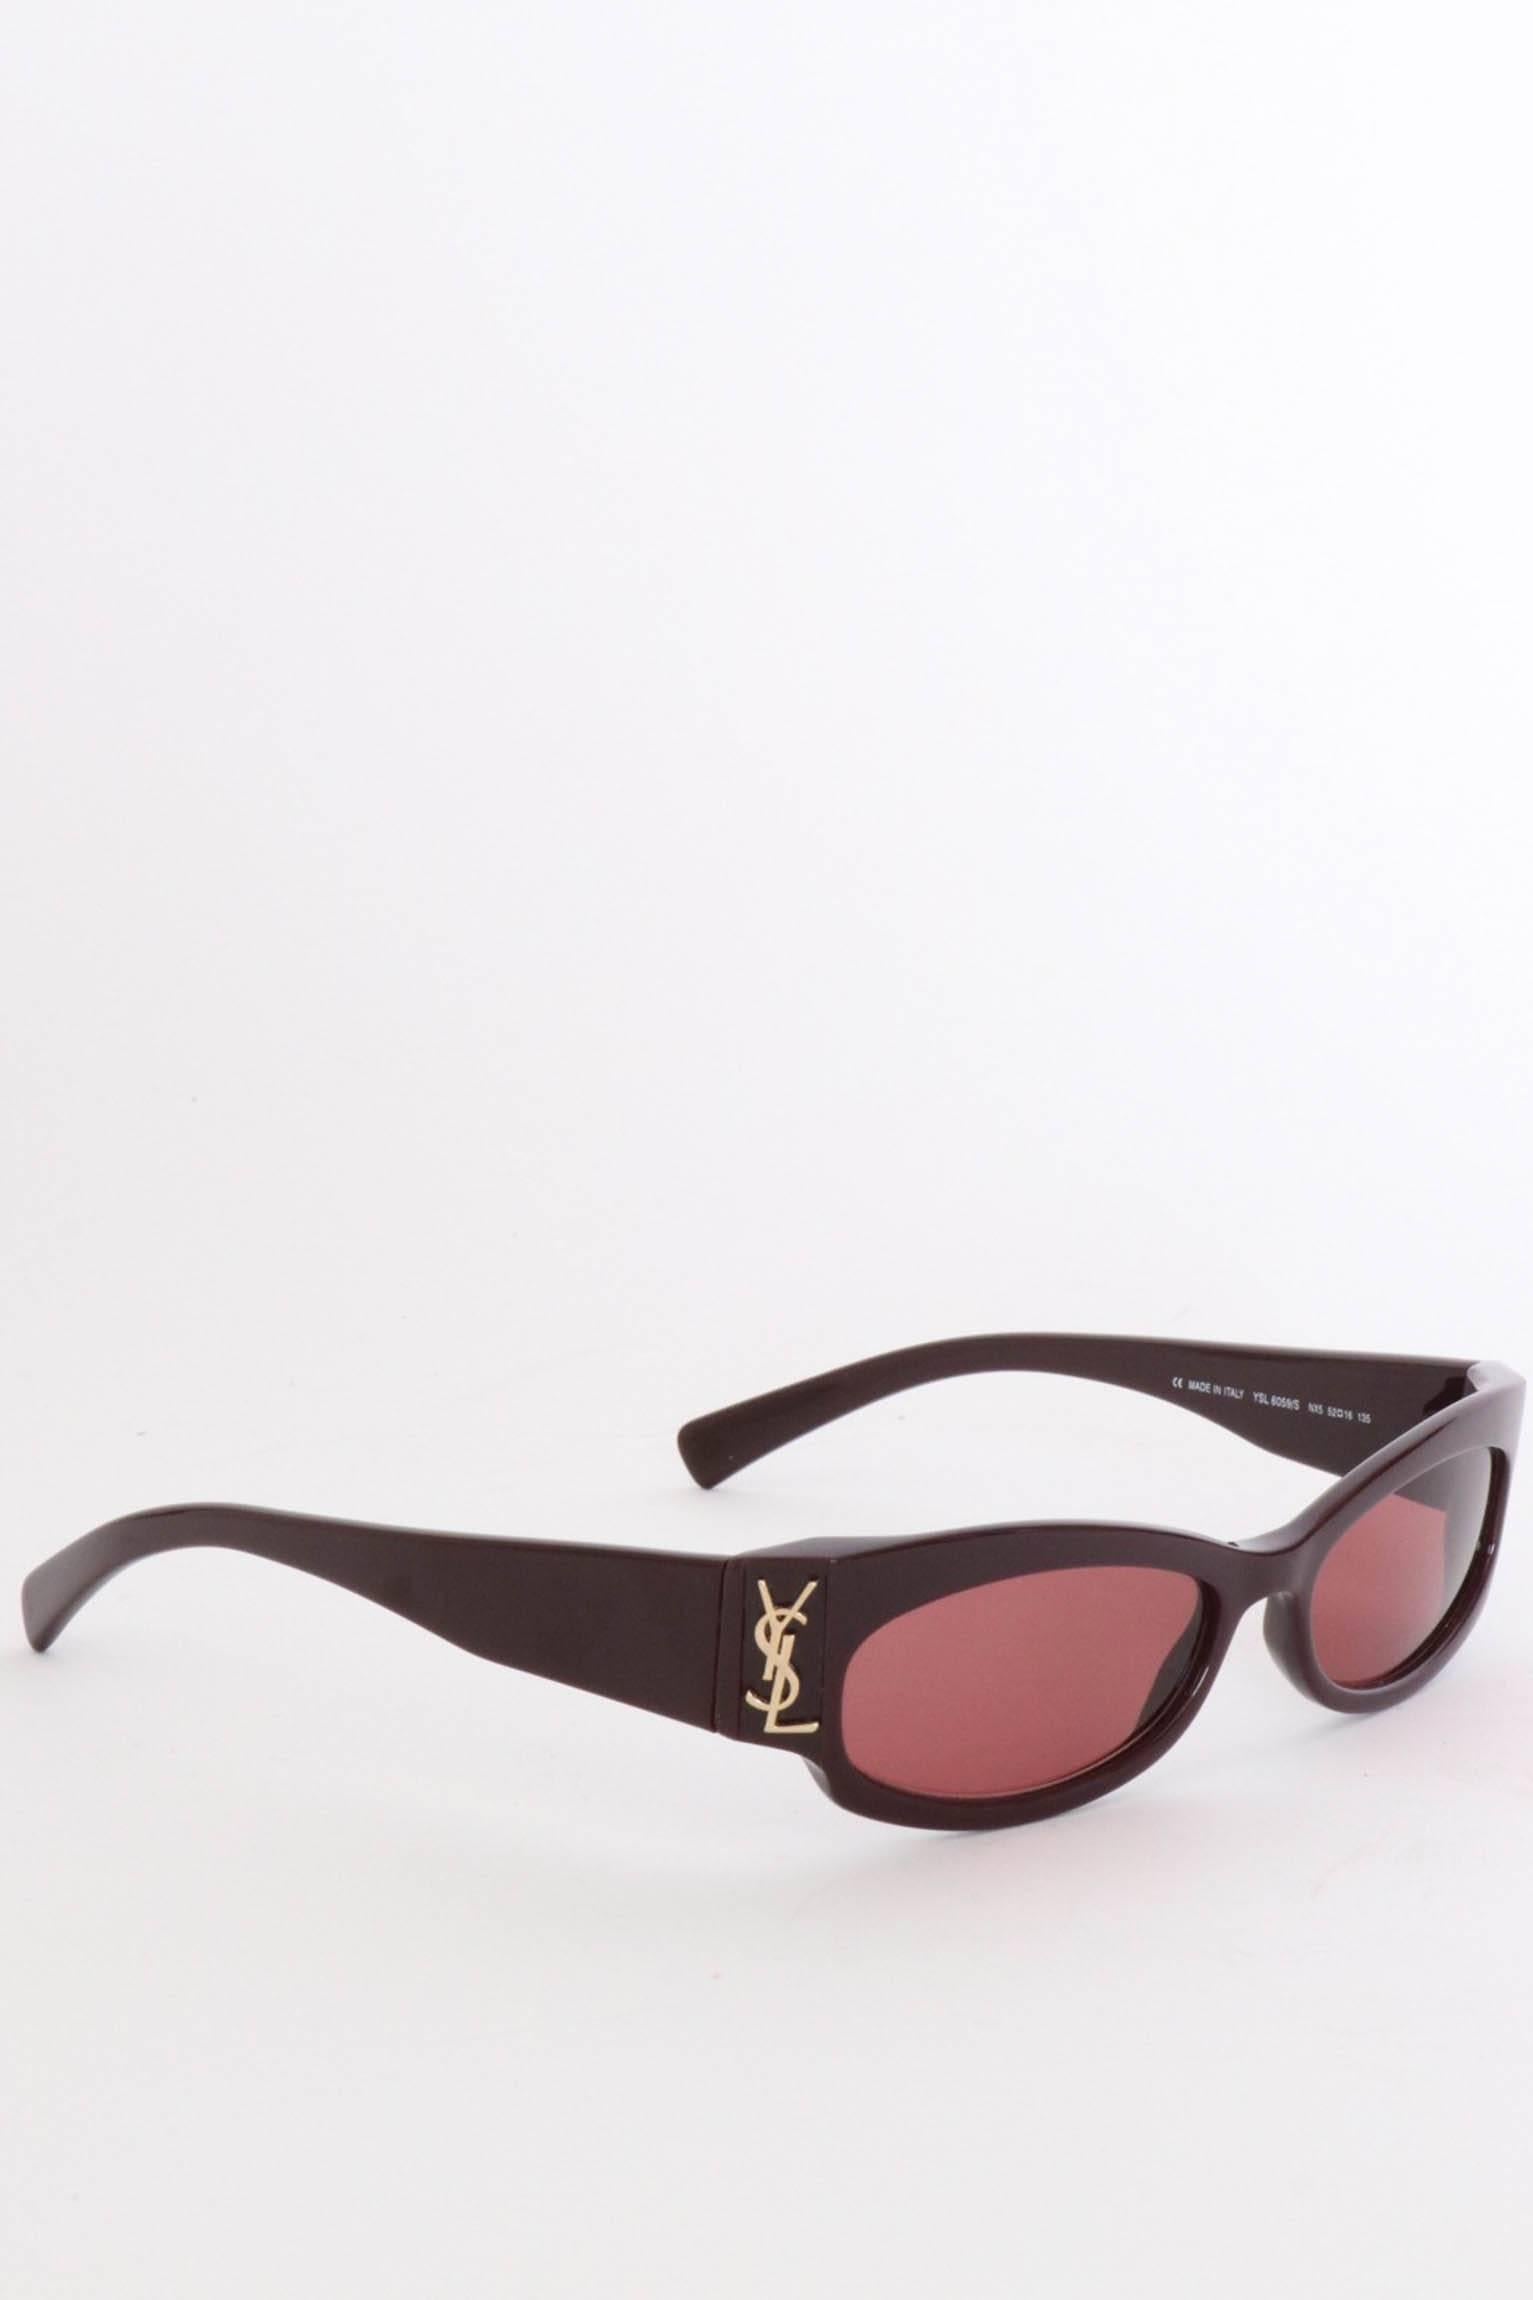 A pair of 1990s Yves Saint Laurent bordeaux sunglasses with a slim frame, red tinted glasses and a gold colored YSL logo situated on both sides of the front. 

The glasses measure: 
Temple length: 13 cm 
Bridge size: 1 cm 
Eye size: 6 cm
